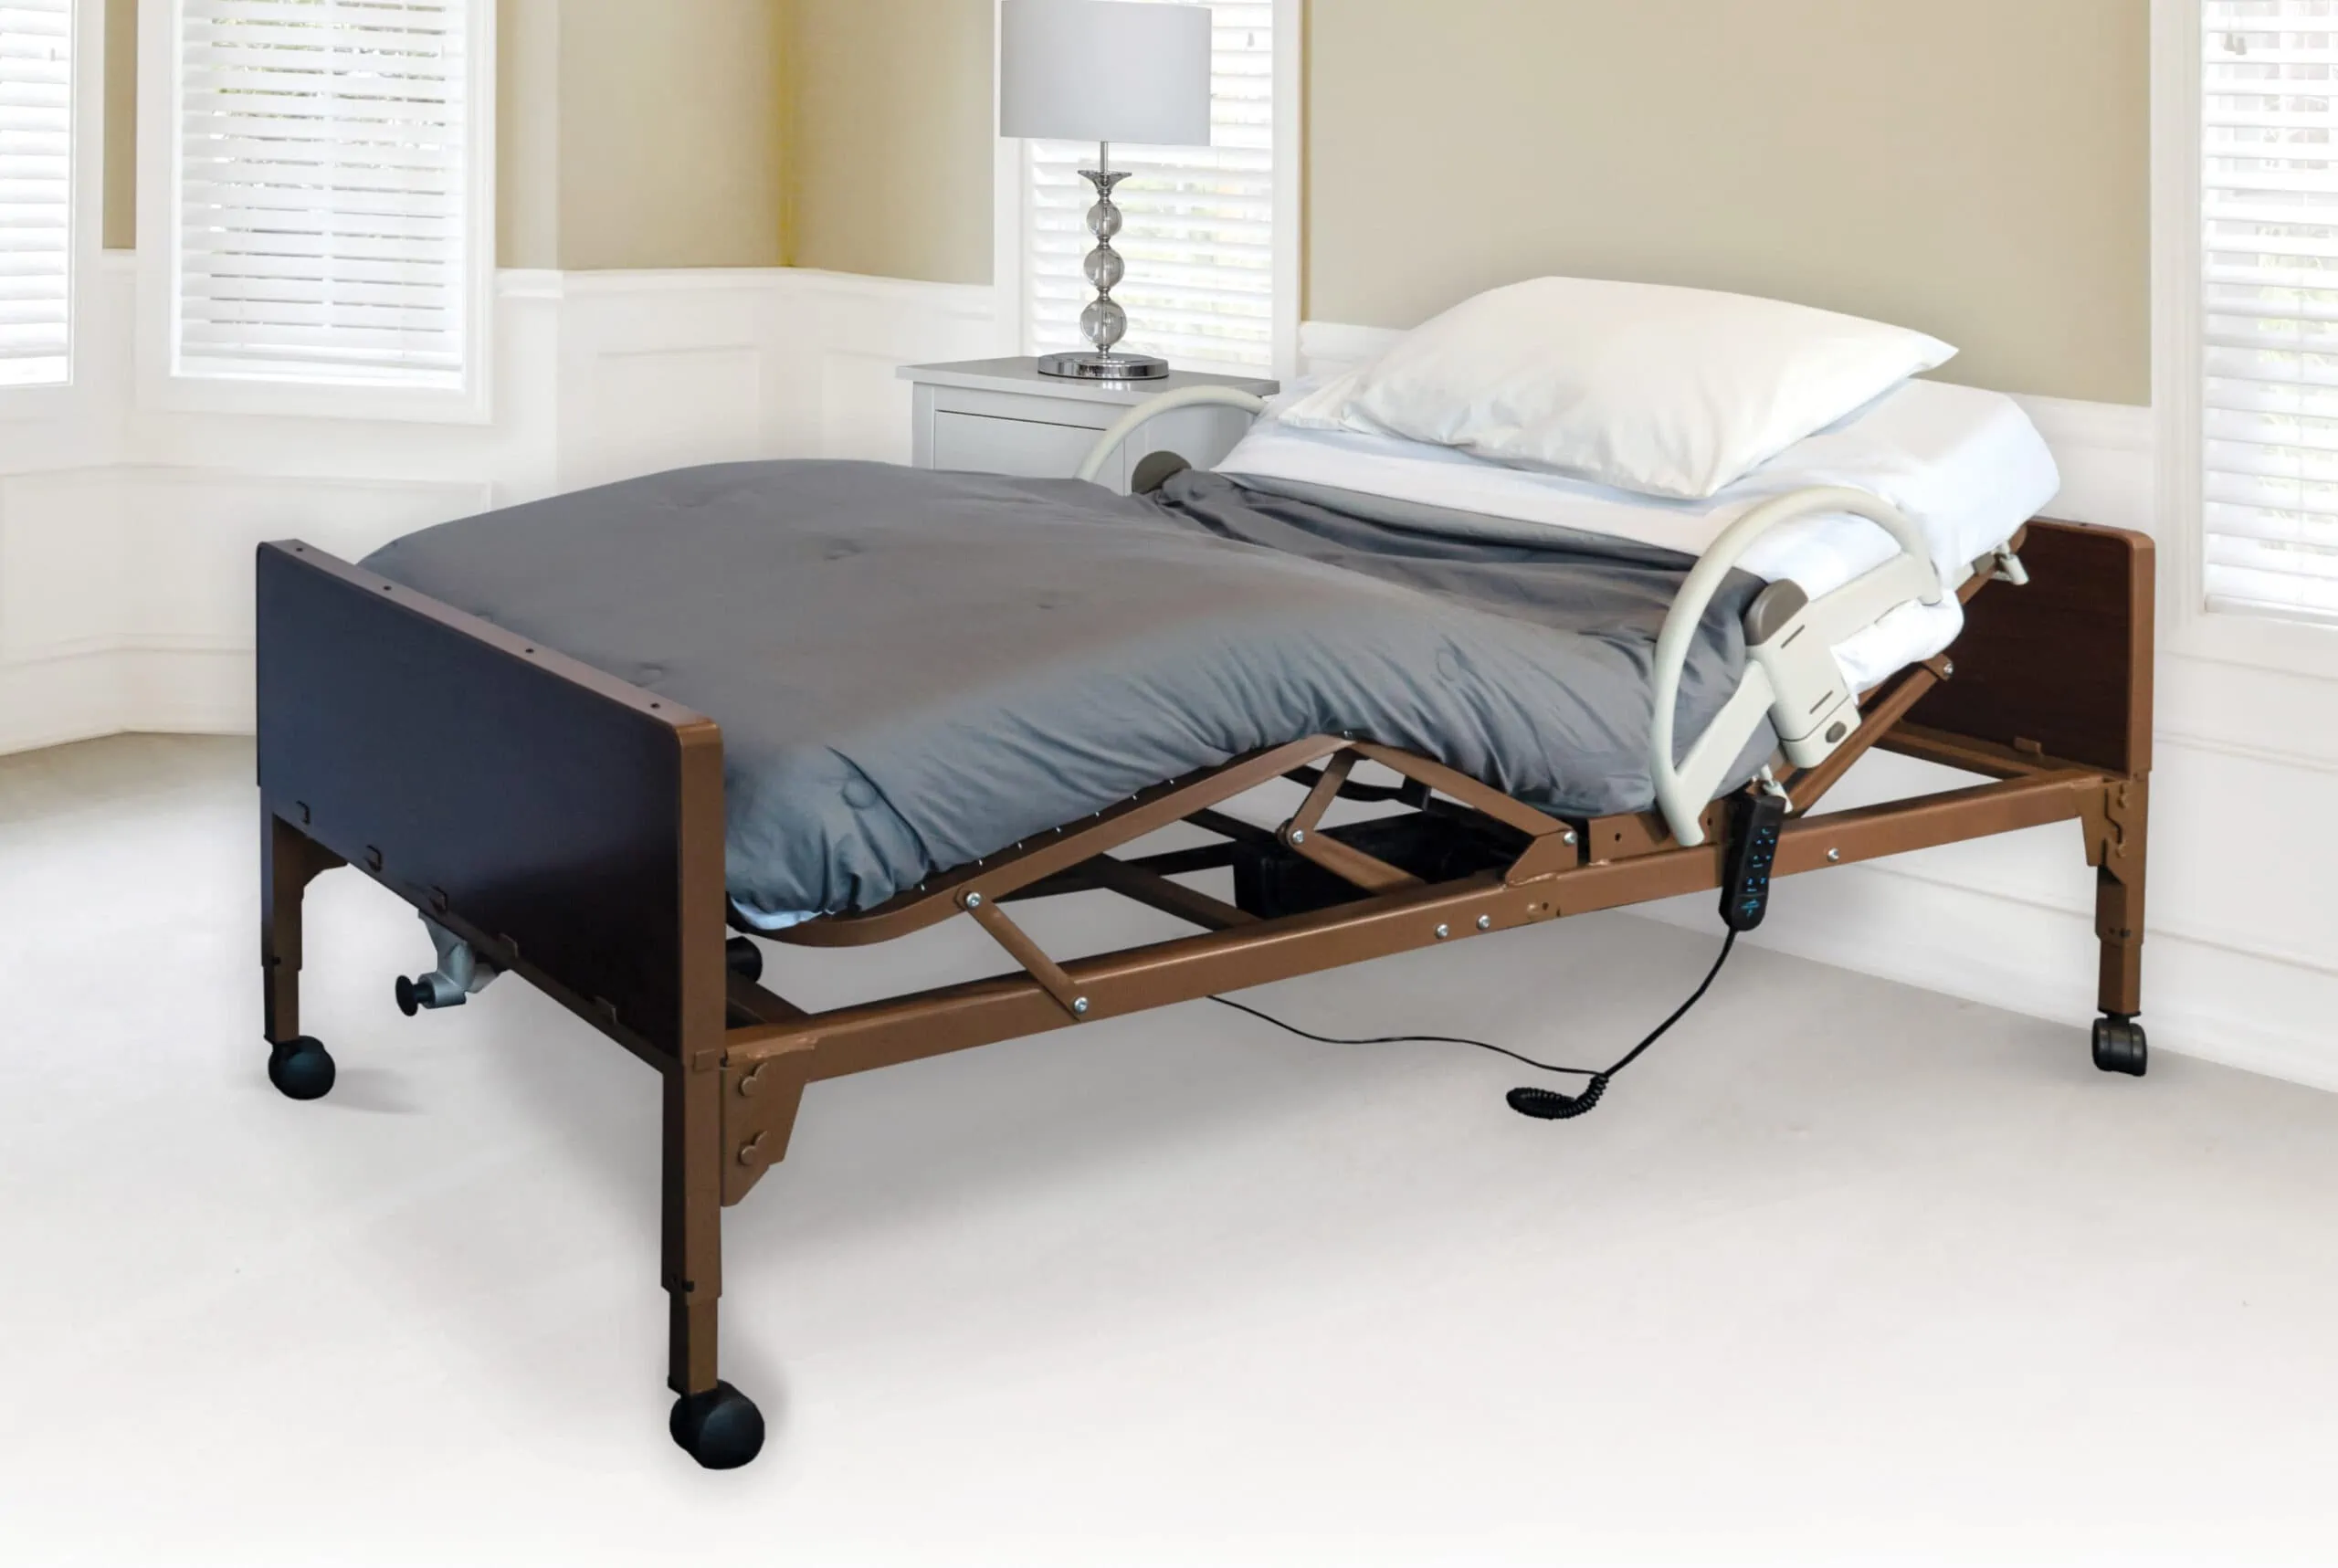 EX Click Bed Handle scaled: Help Inc. - Everyone is relying on you. You can rely on us.